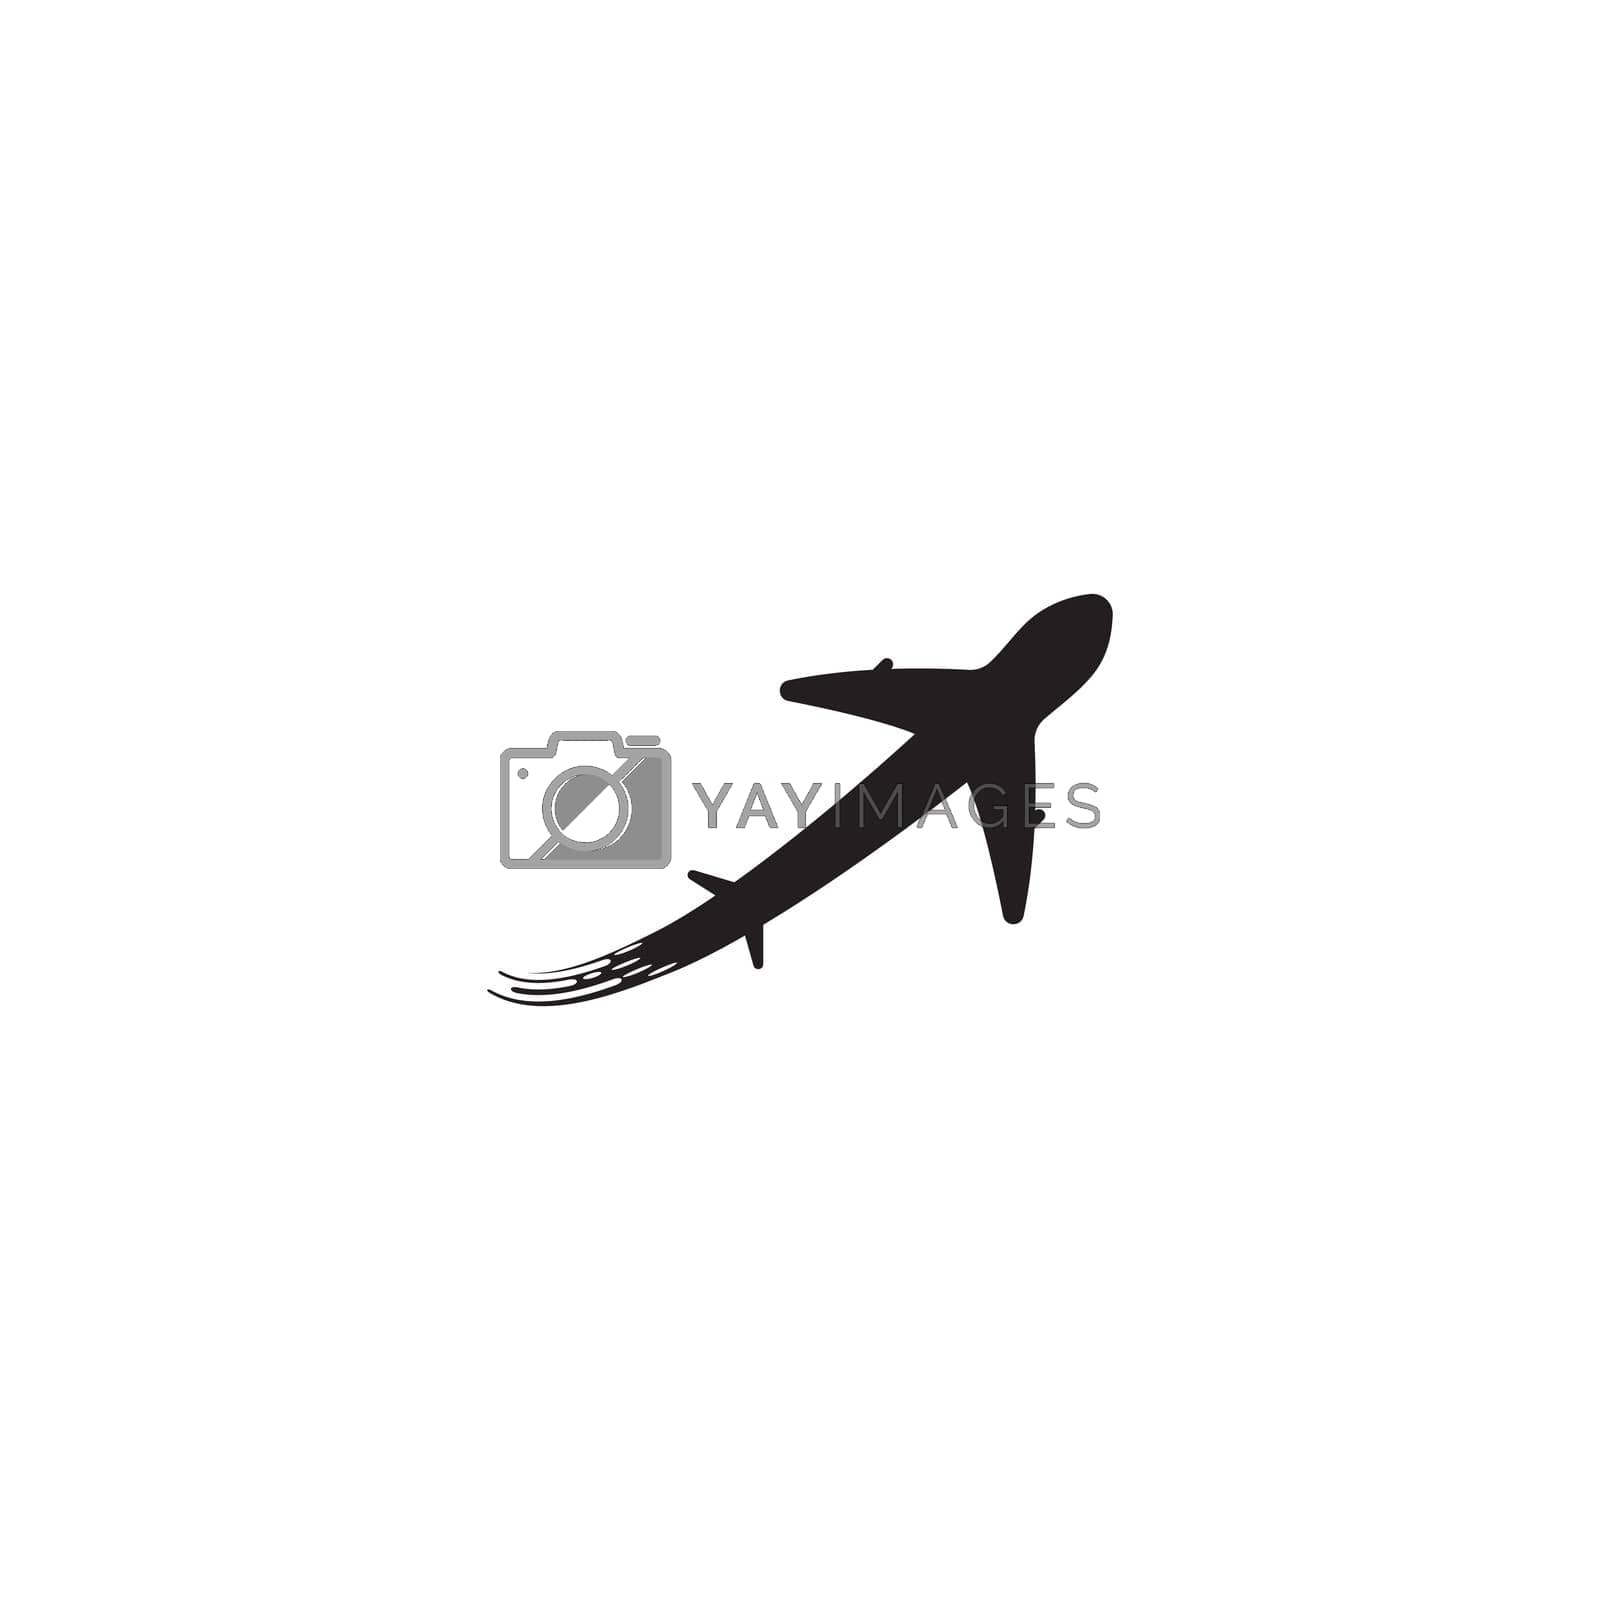 Royalty free image of Plane logo vector by awk